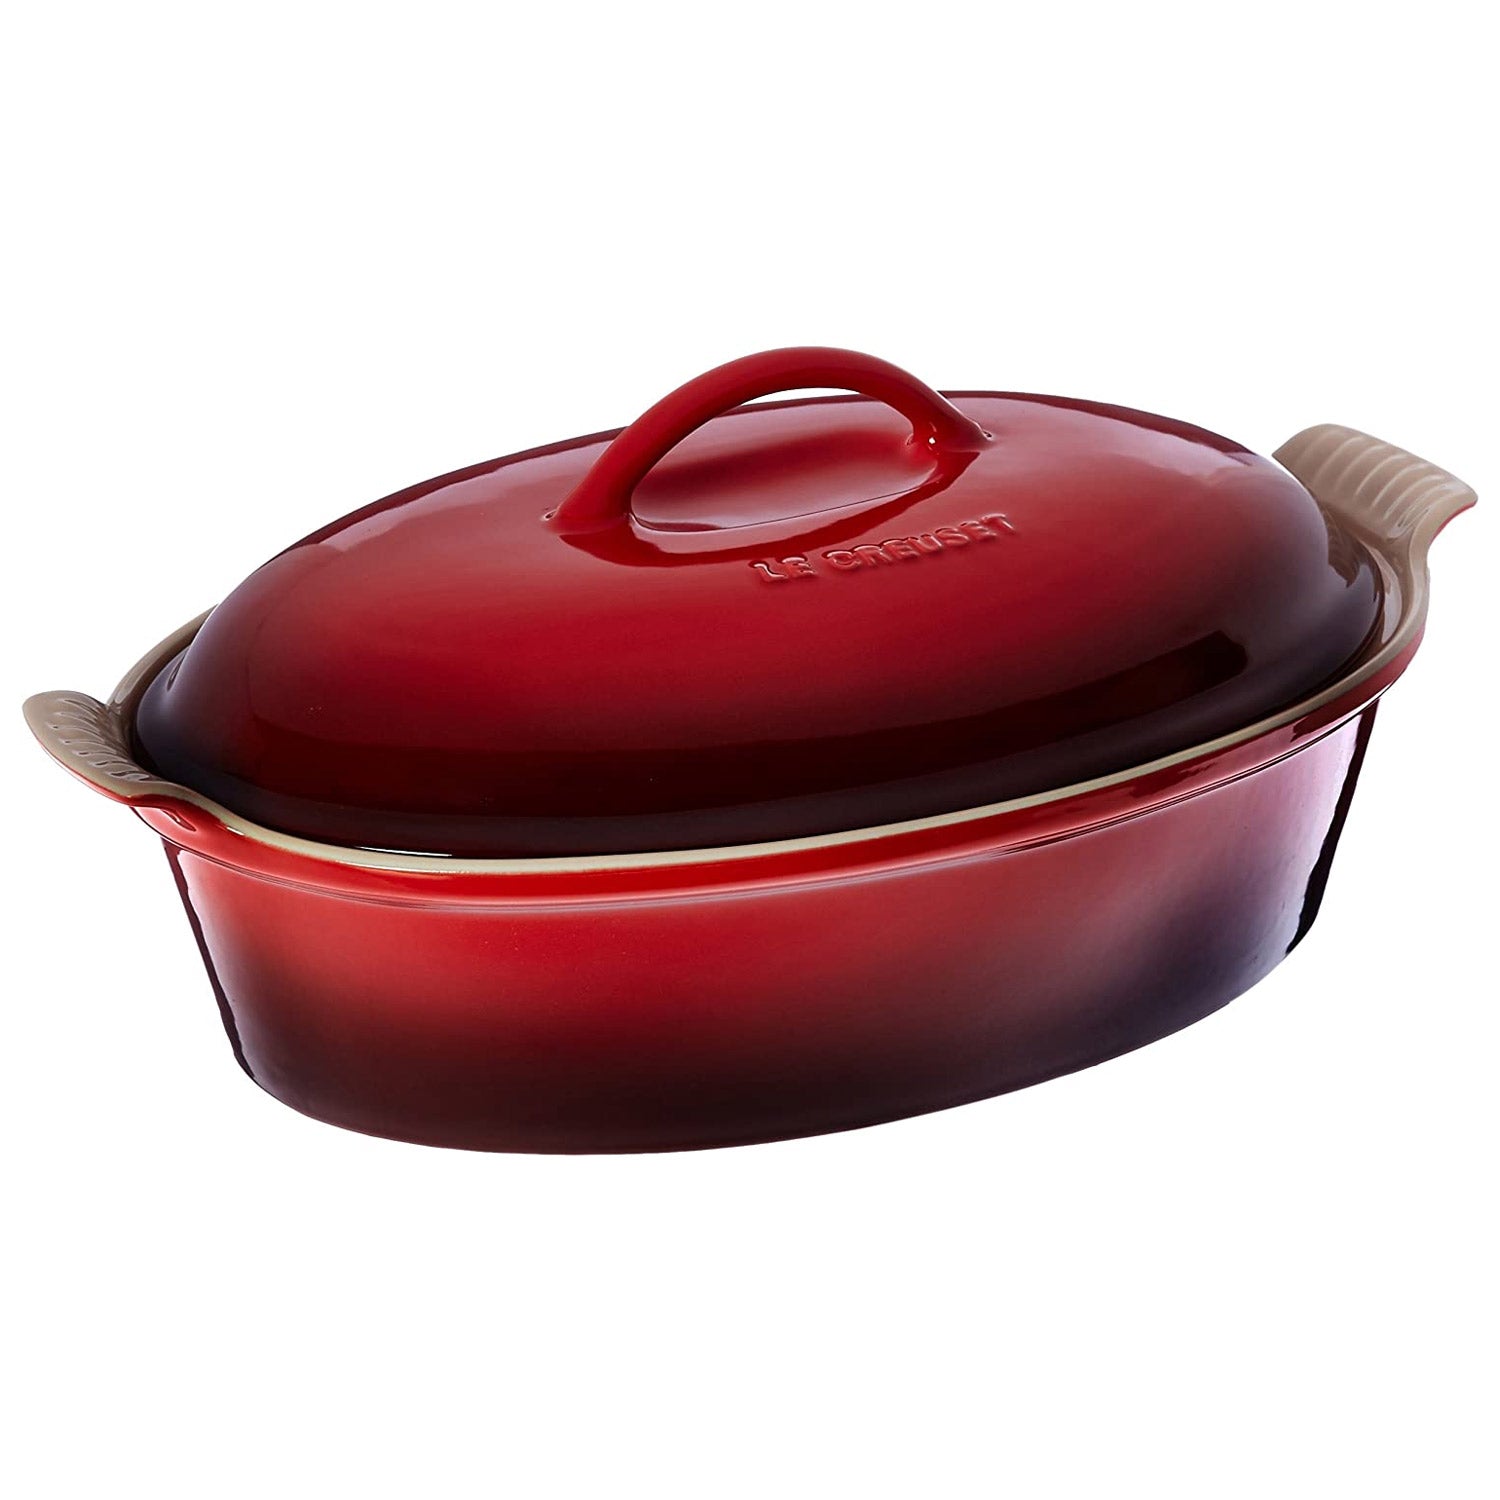 5 Qt. Casserole Dish with Lid, Red, SMEG